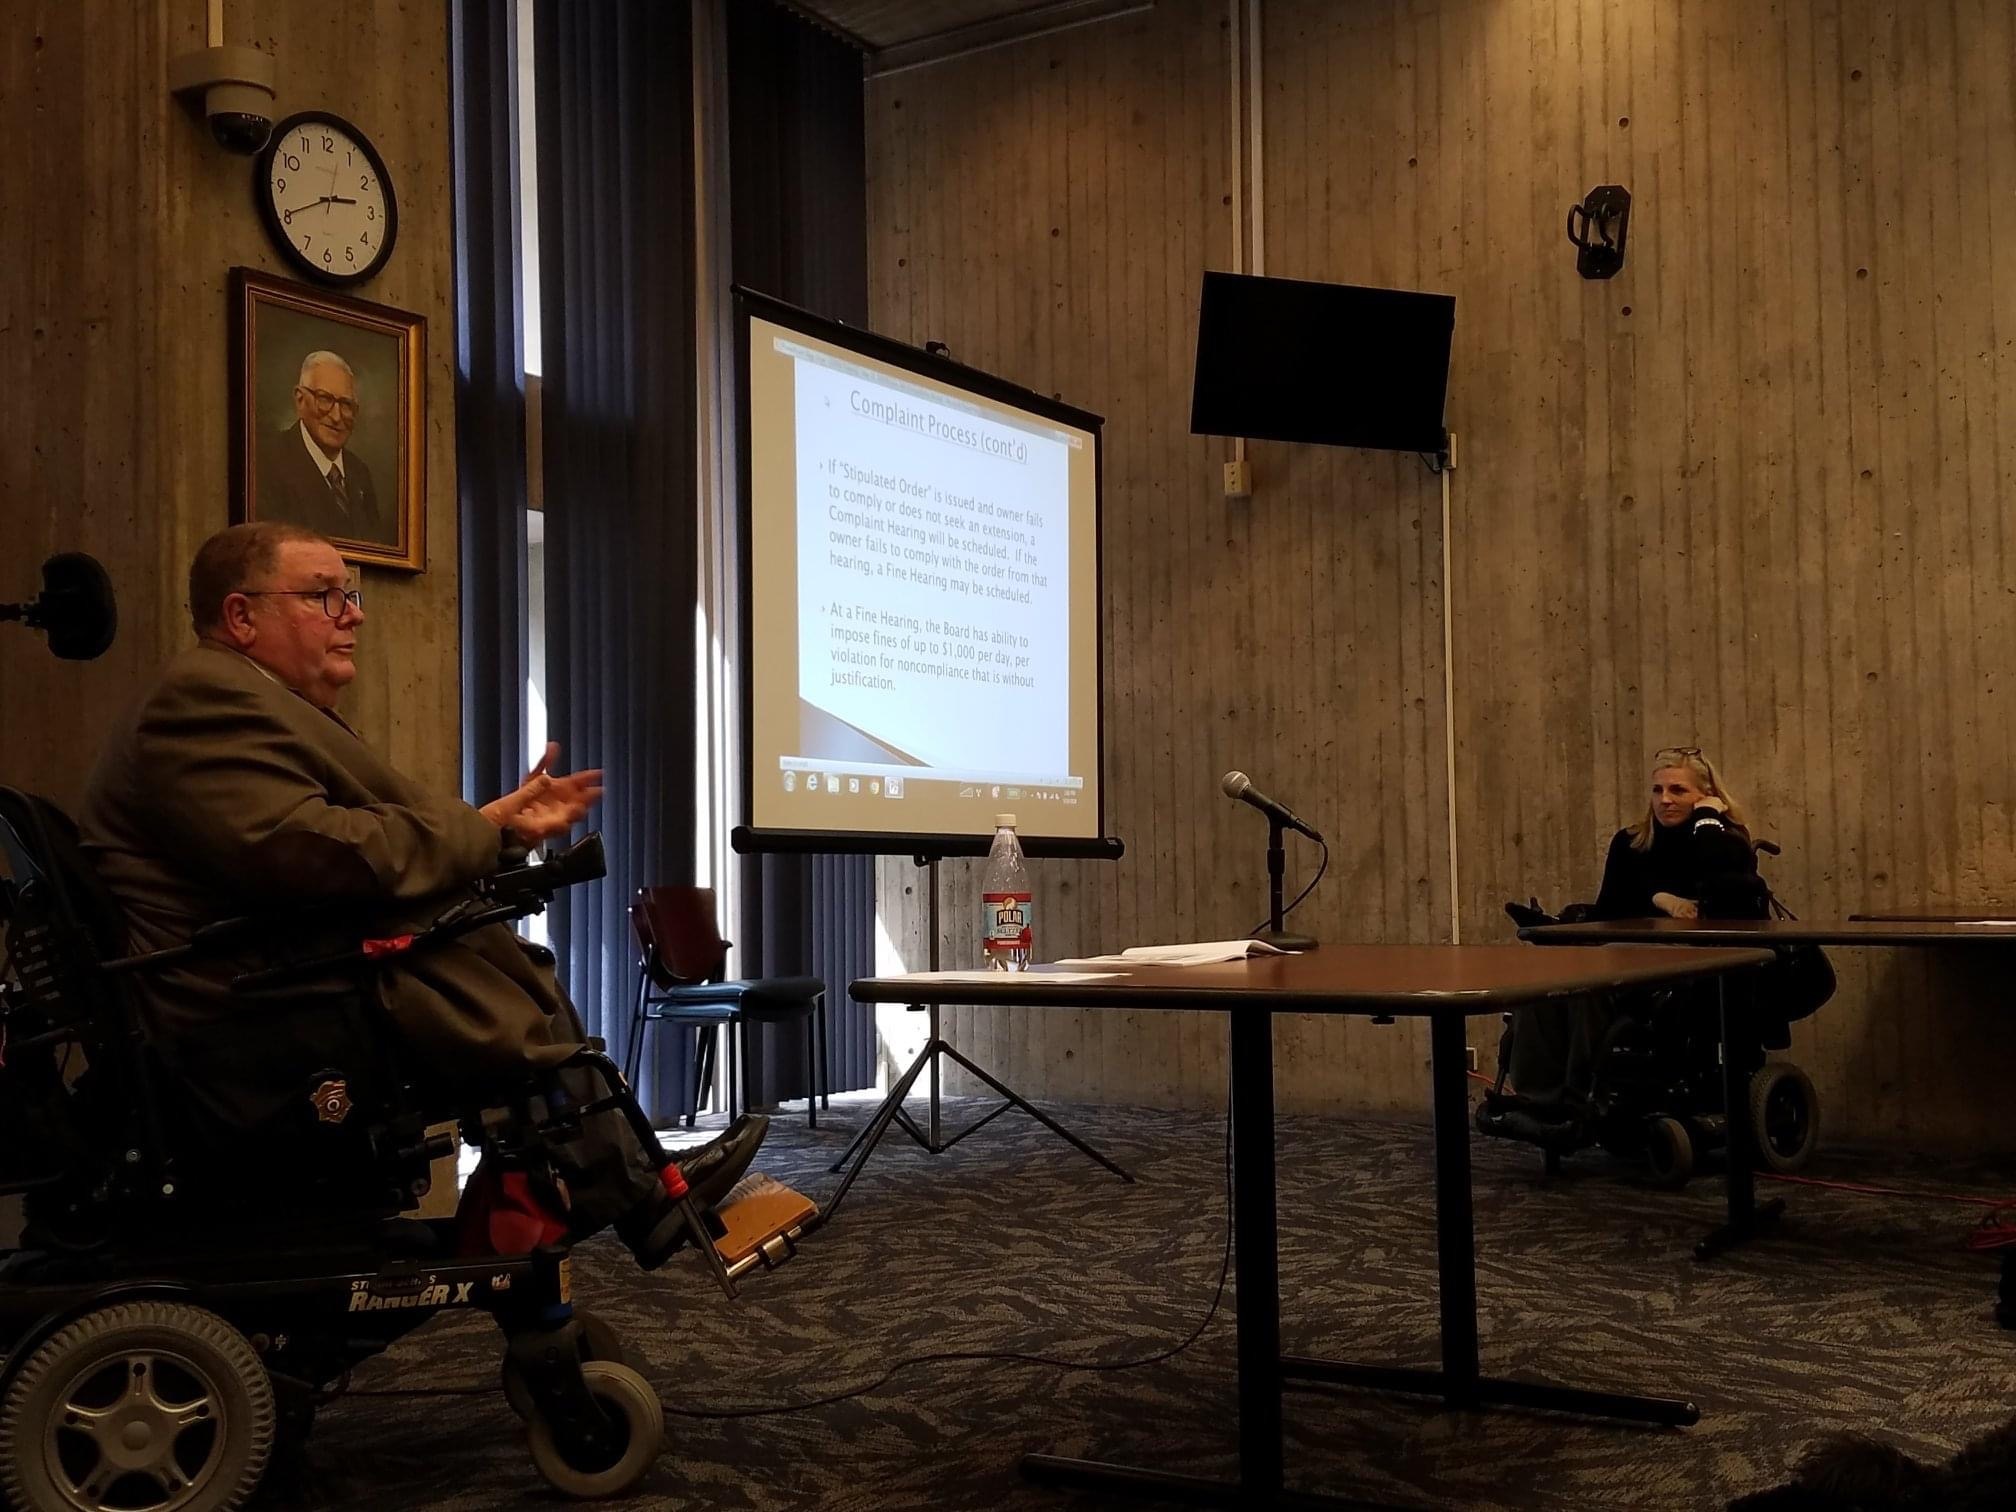 Tom sits at a table with a microphone presenting in an office setting. A large screen is to his left with a PowerPoint slide visible on it. A woman is seen sitting in a wheelchair in the distance.